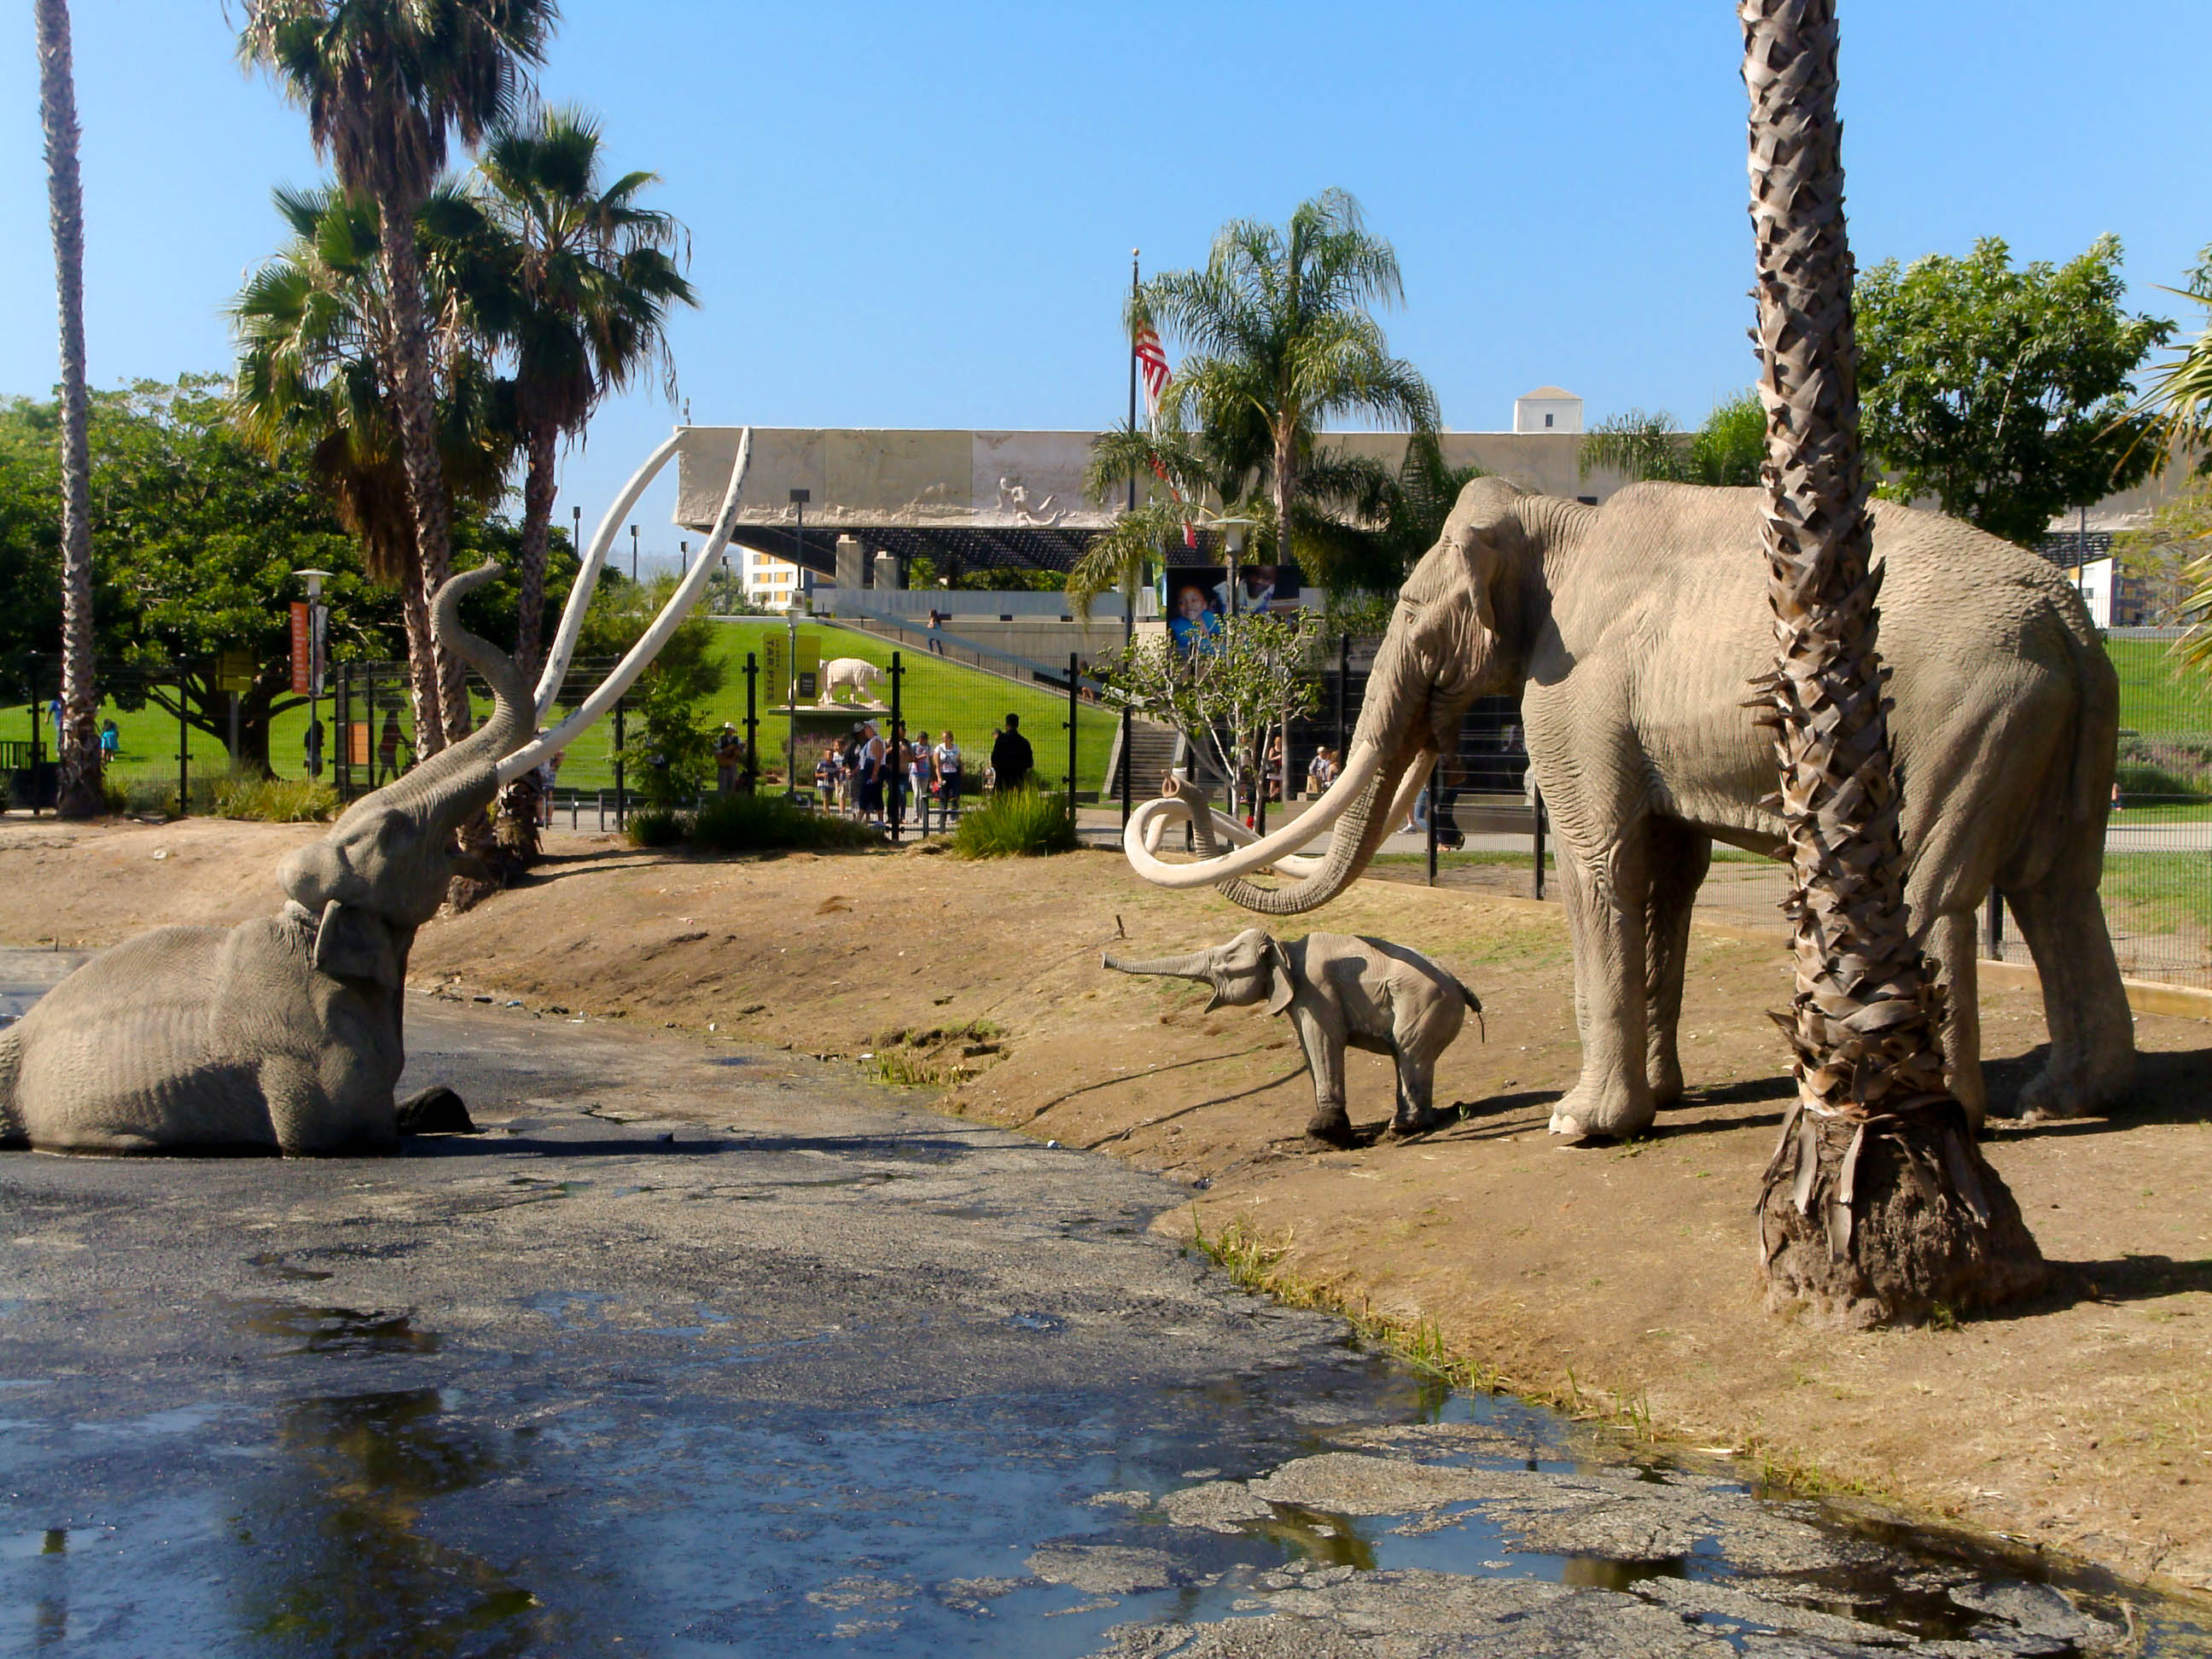 La Brea Tar Pits And Museum Hours